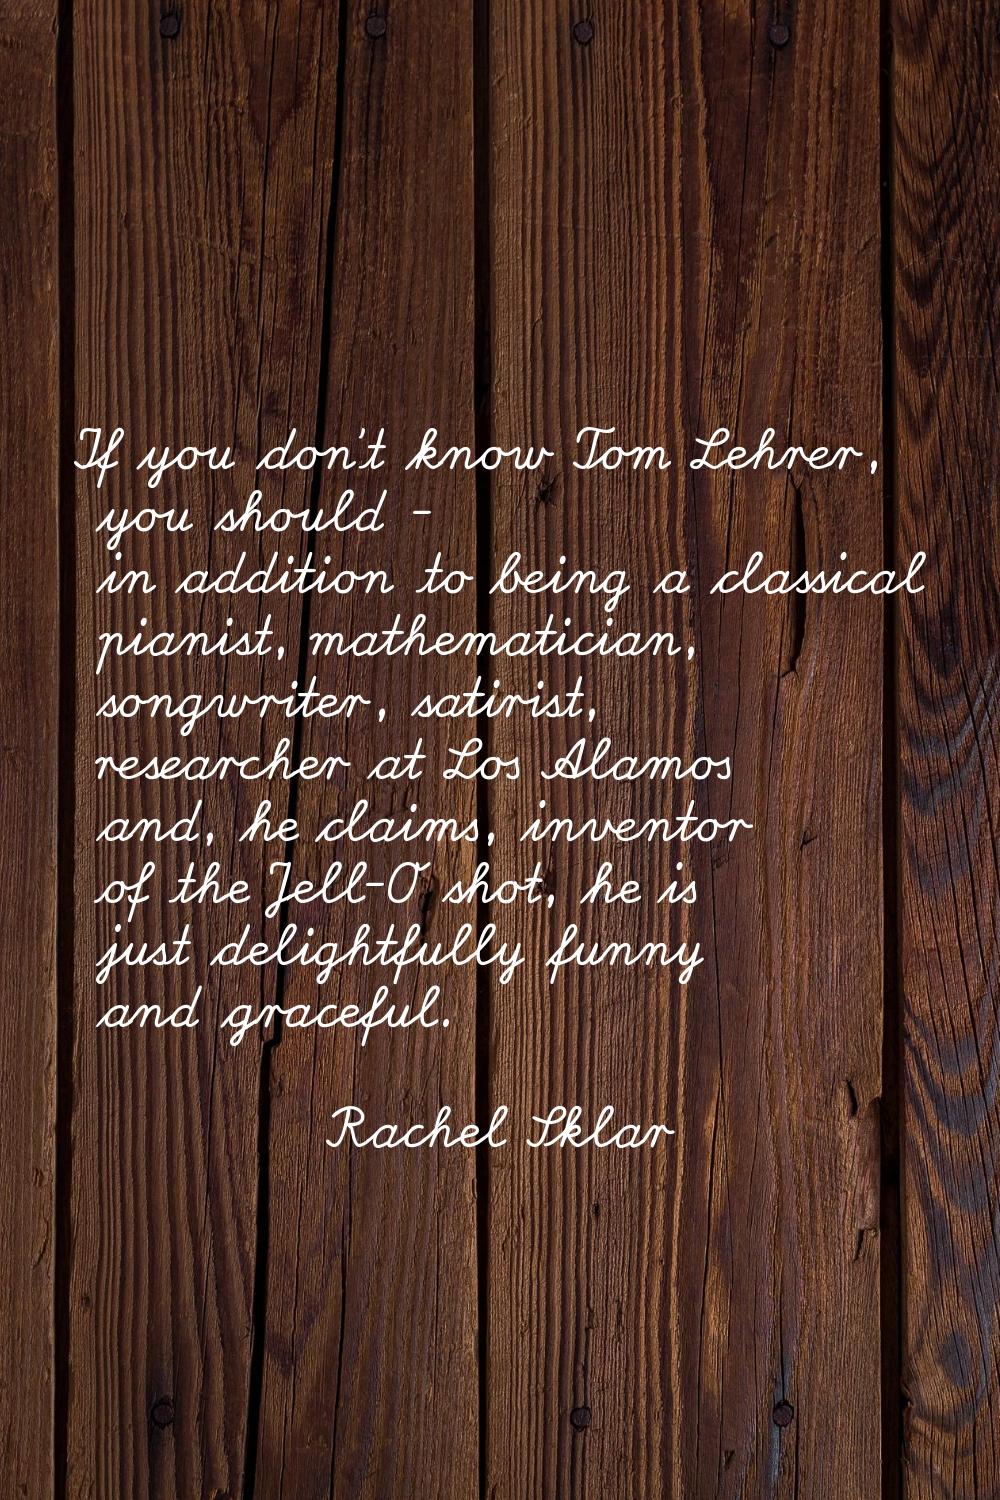 If you don't know Tom Lehrer, you should - in addition to being a classical pianist, mathematician,